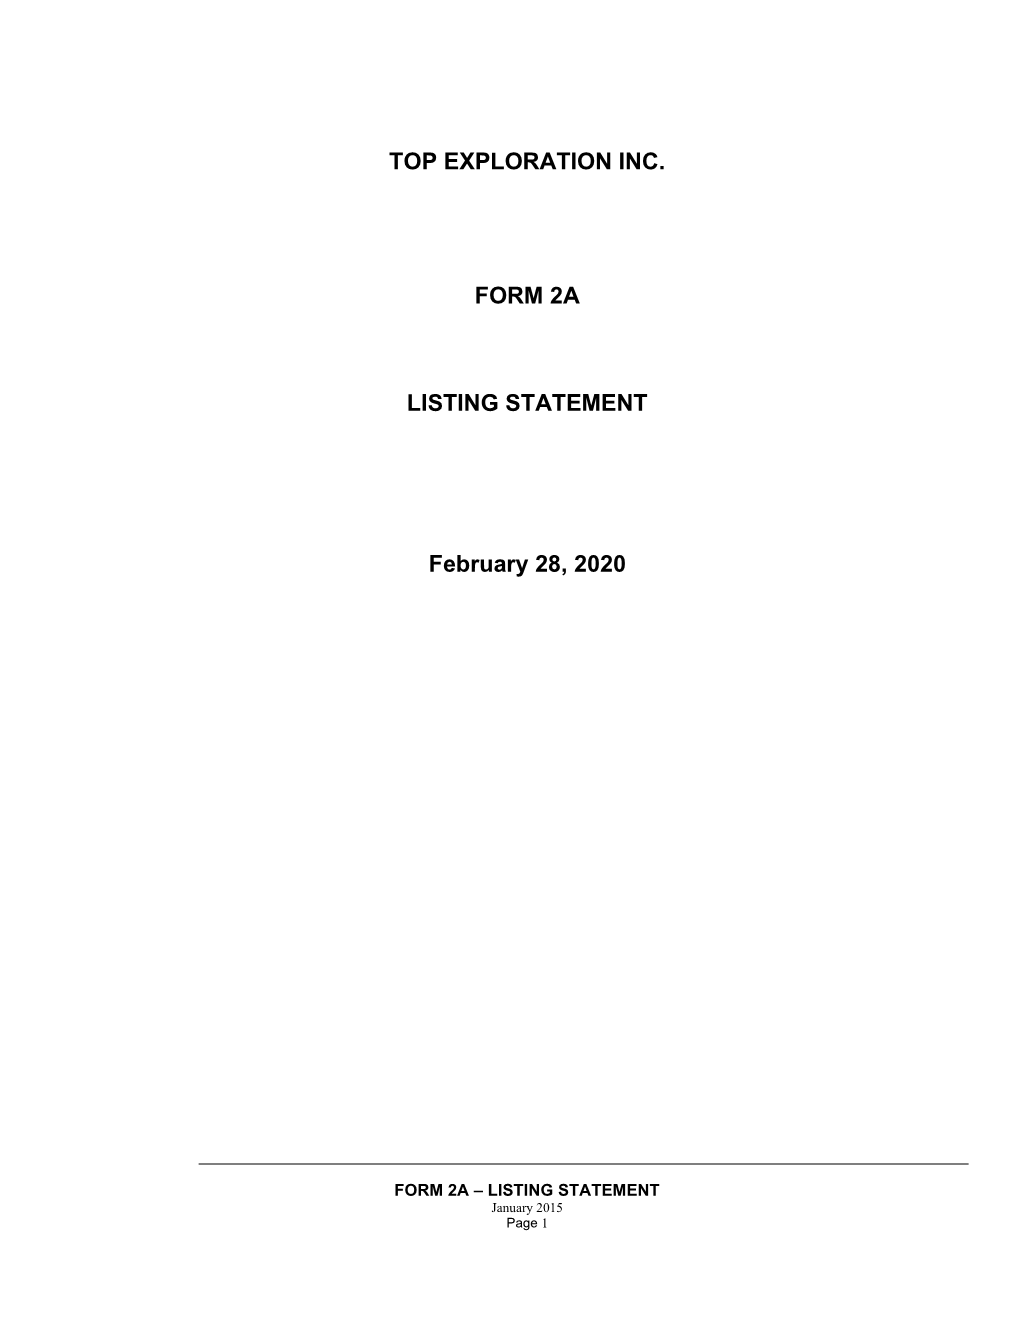 TOP EXPLORATION INC. FORM 2A LISTING STATEMENT February 28